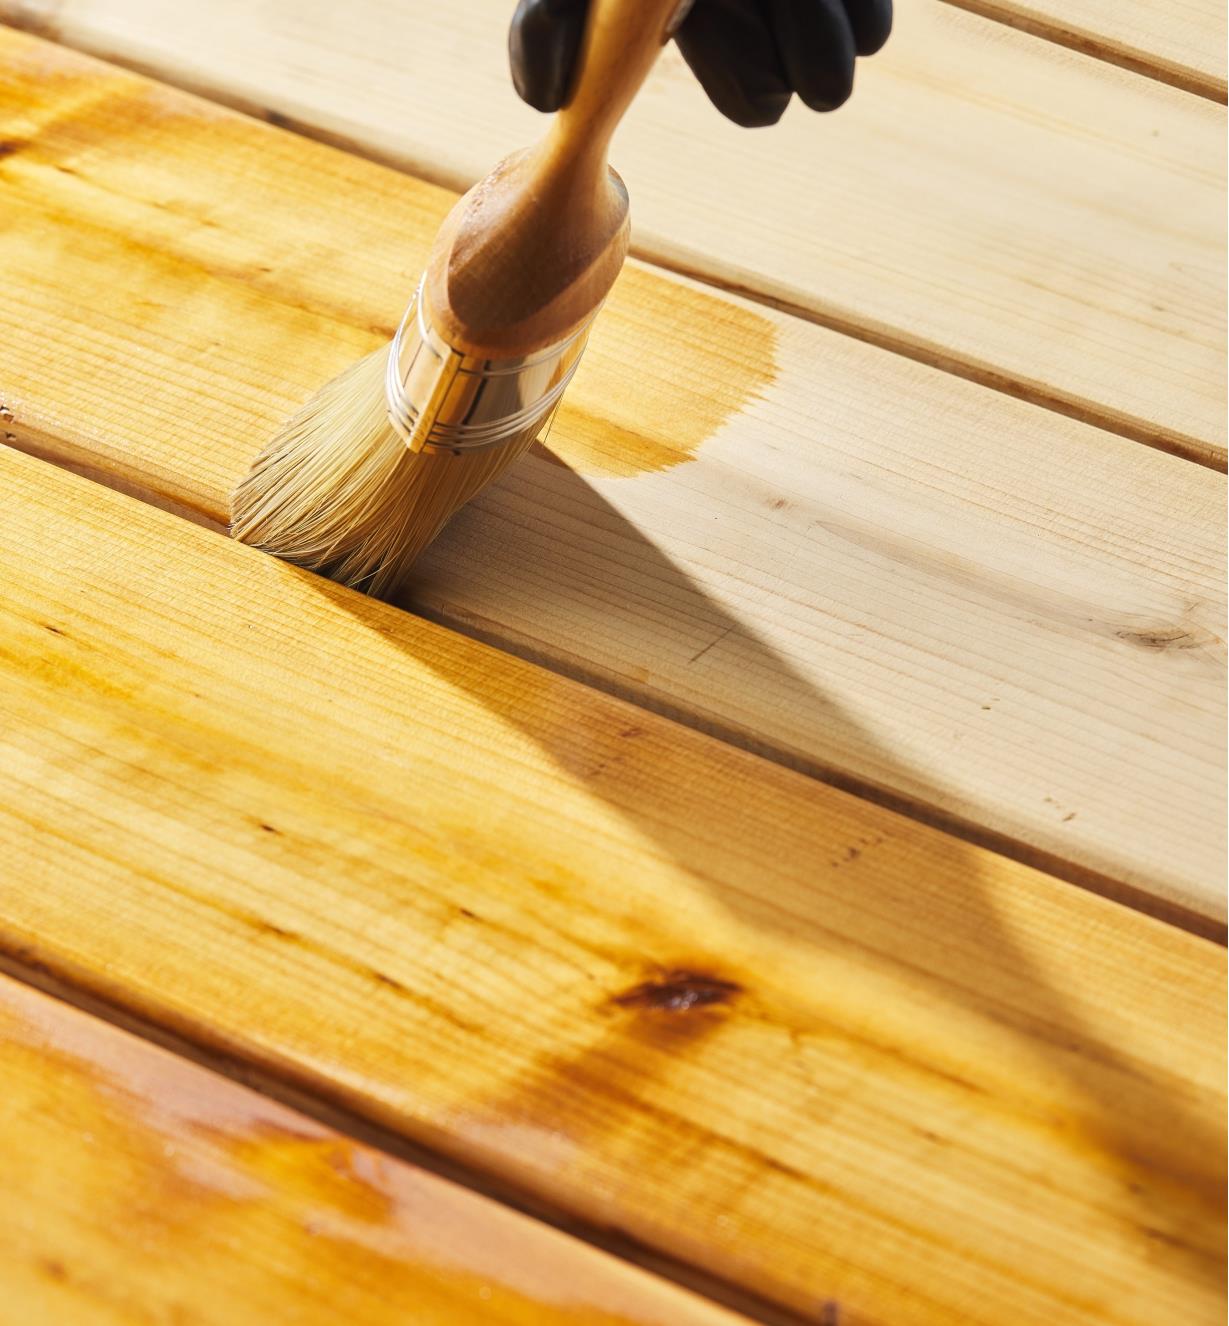 Using a brush to apply Osmo clear decking oil to a wooden deck